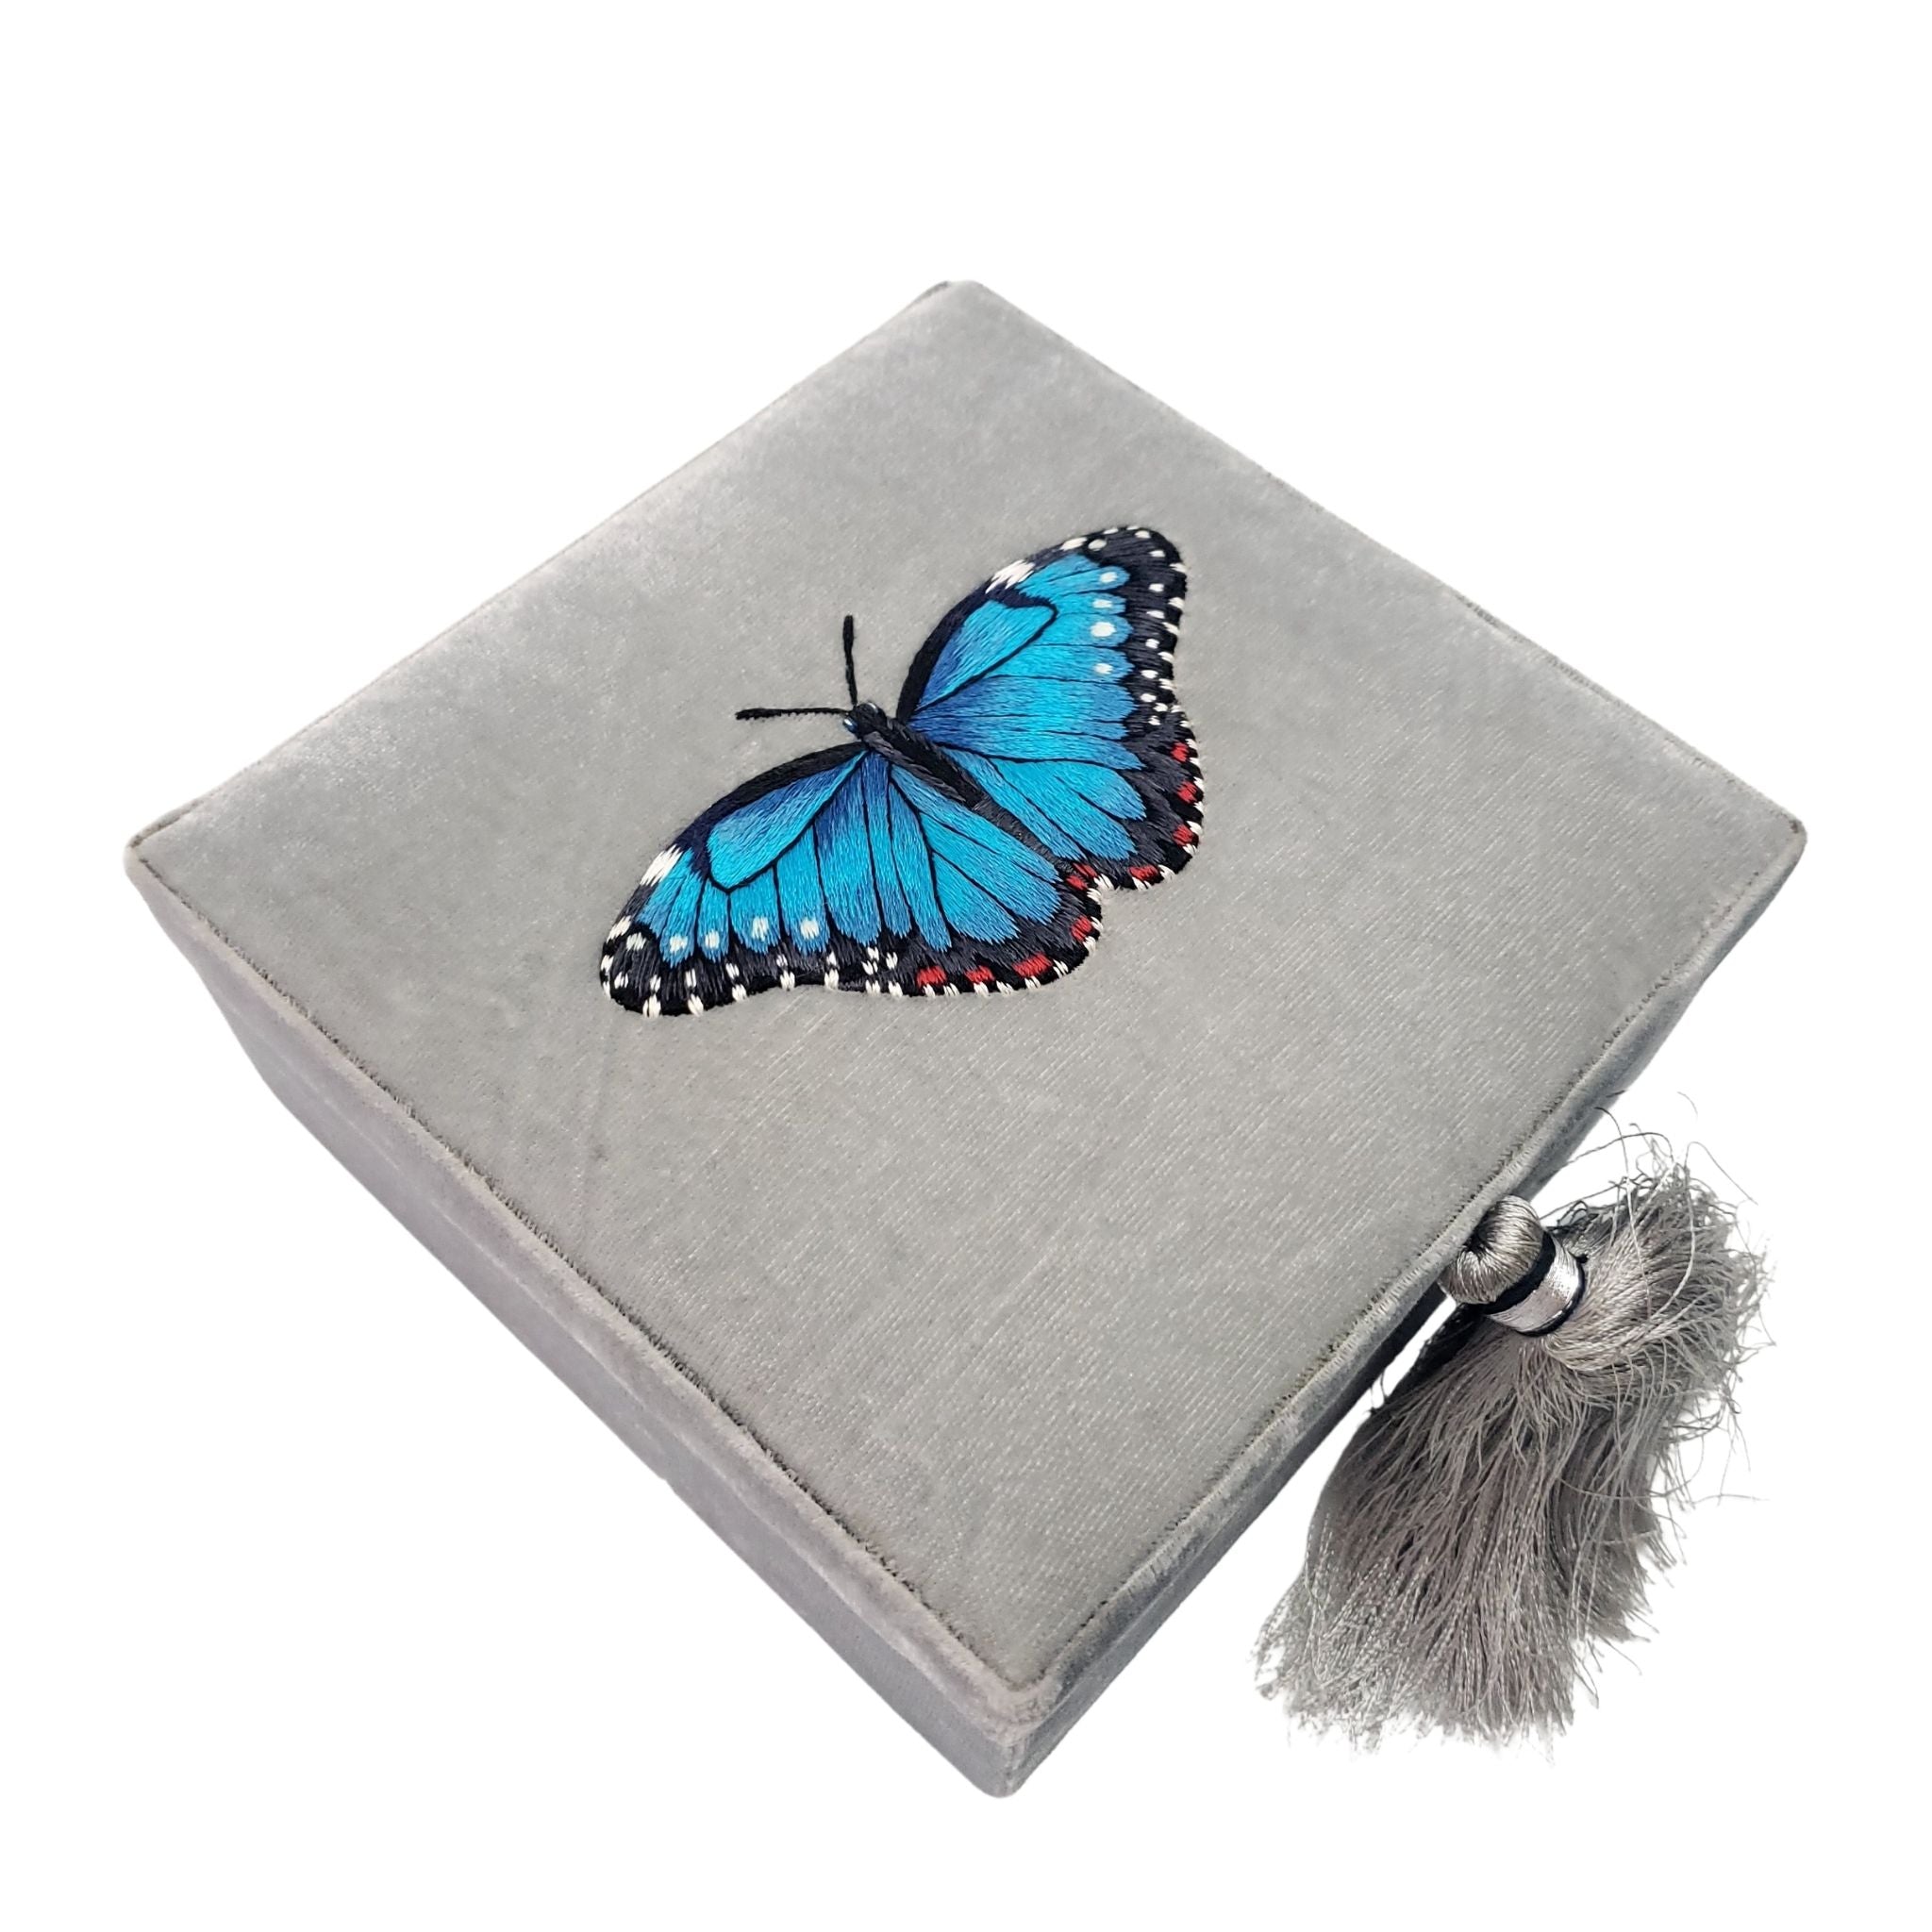 Butterfly and Flower Embroidered Bag - ApolloBox